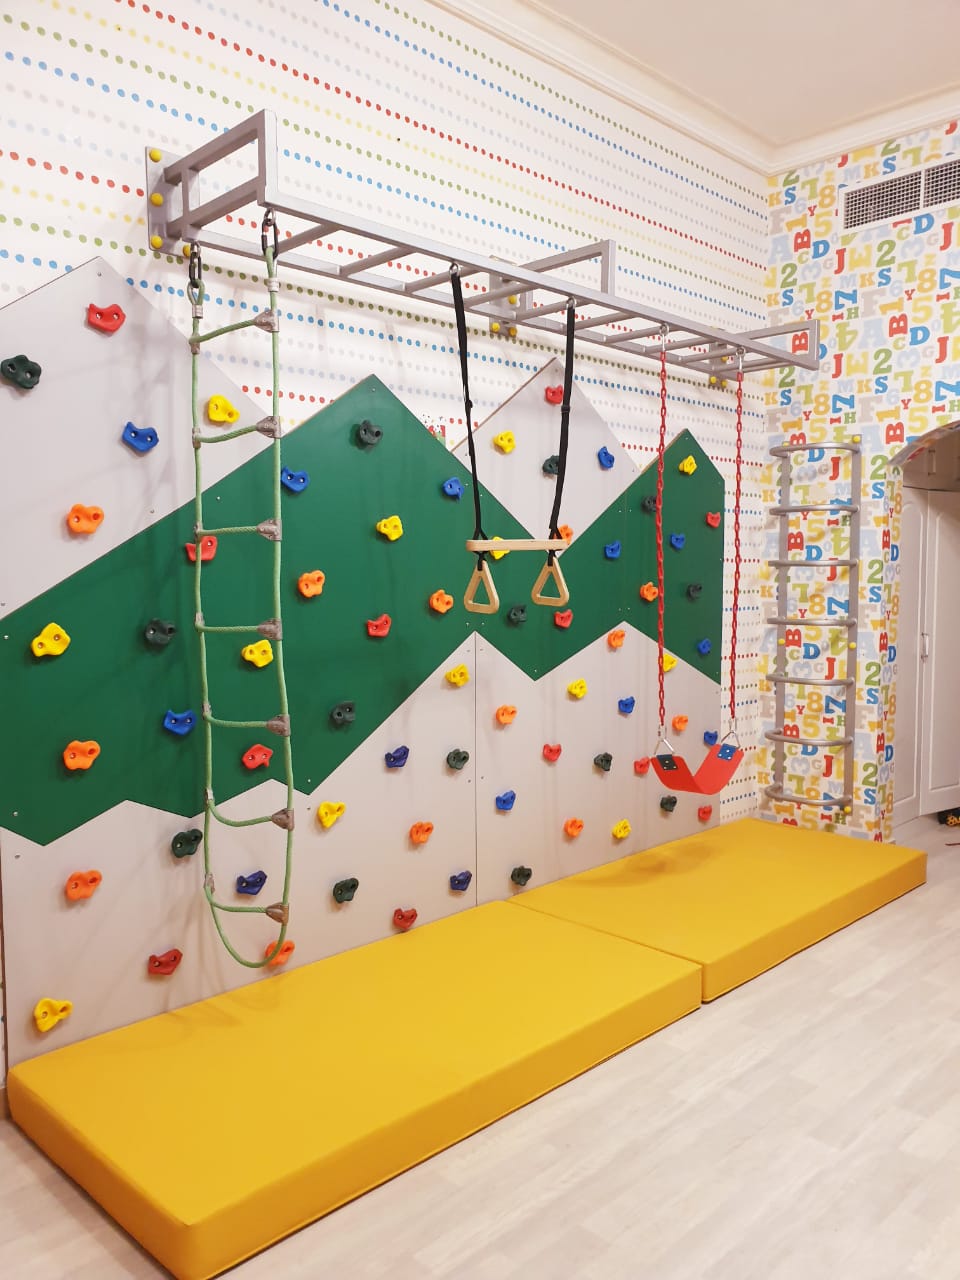 CLI9 - Mountain Climbing Wall with Monkey Bars and more (3)